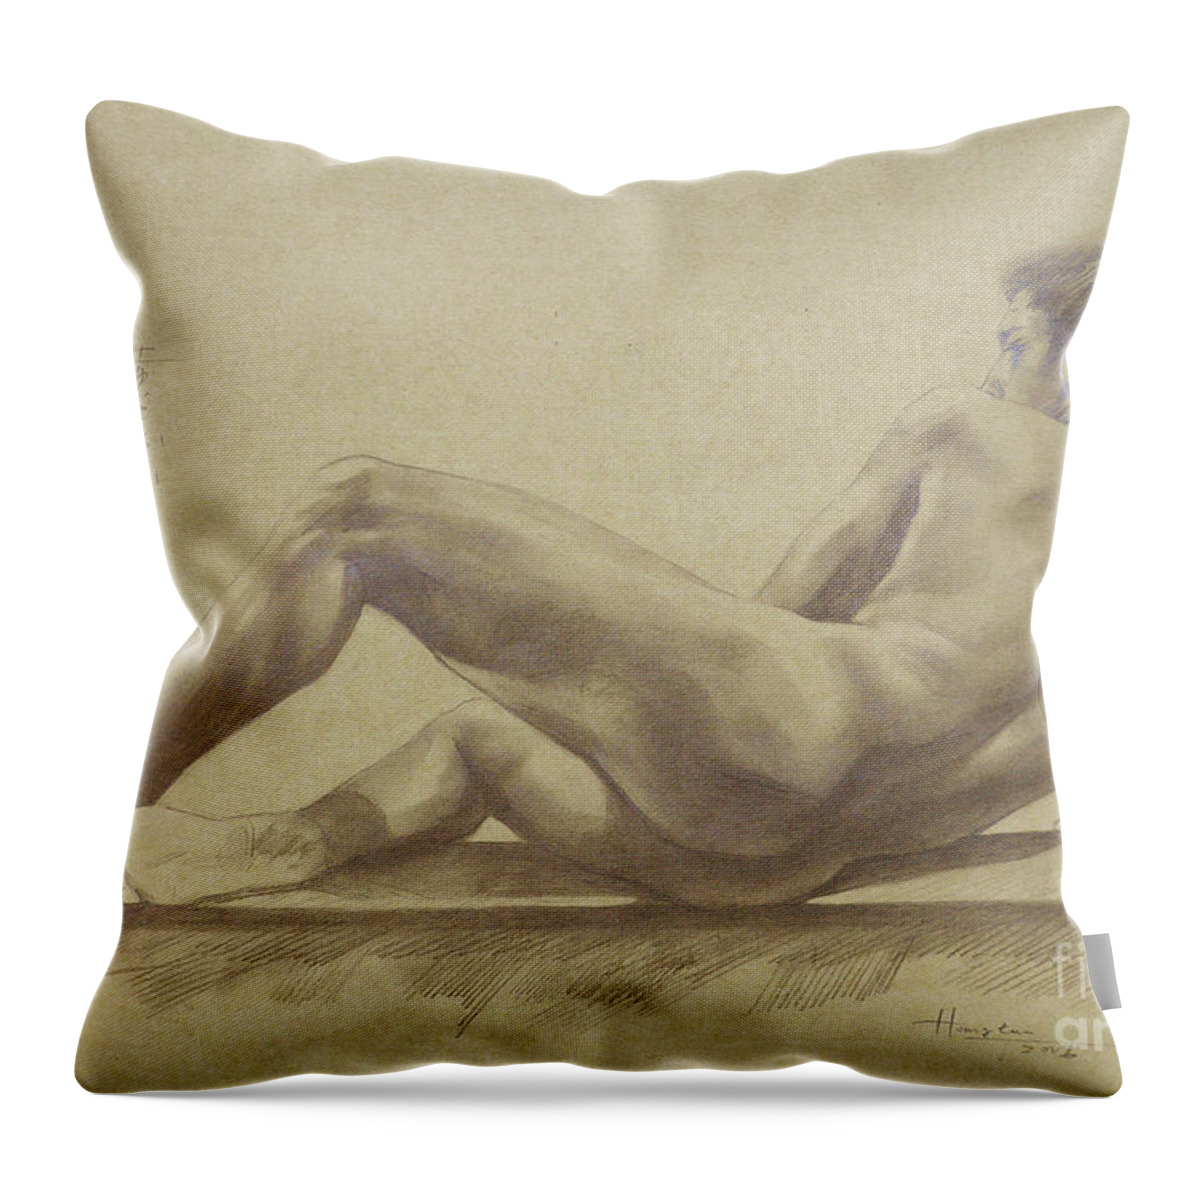 Original Art Throw Pillow featuring the drawing Original Drawing Male Nude Pencil On Paper #16-6-1 by Hongtao Huang